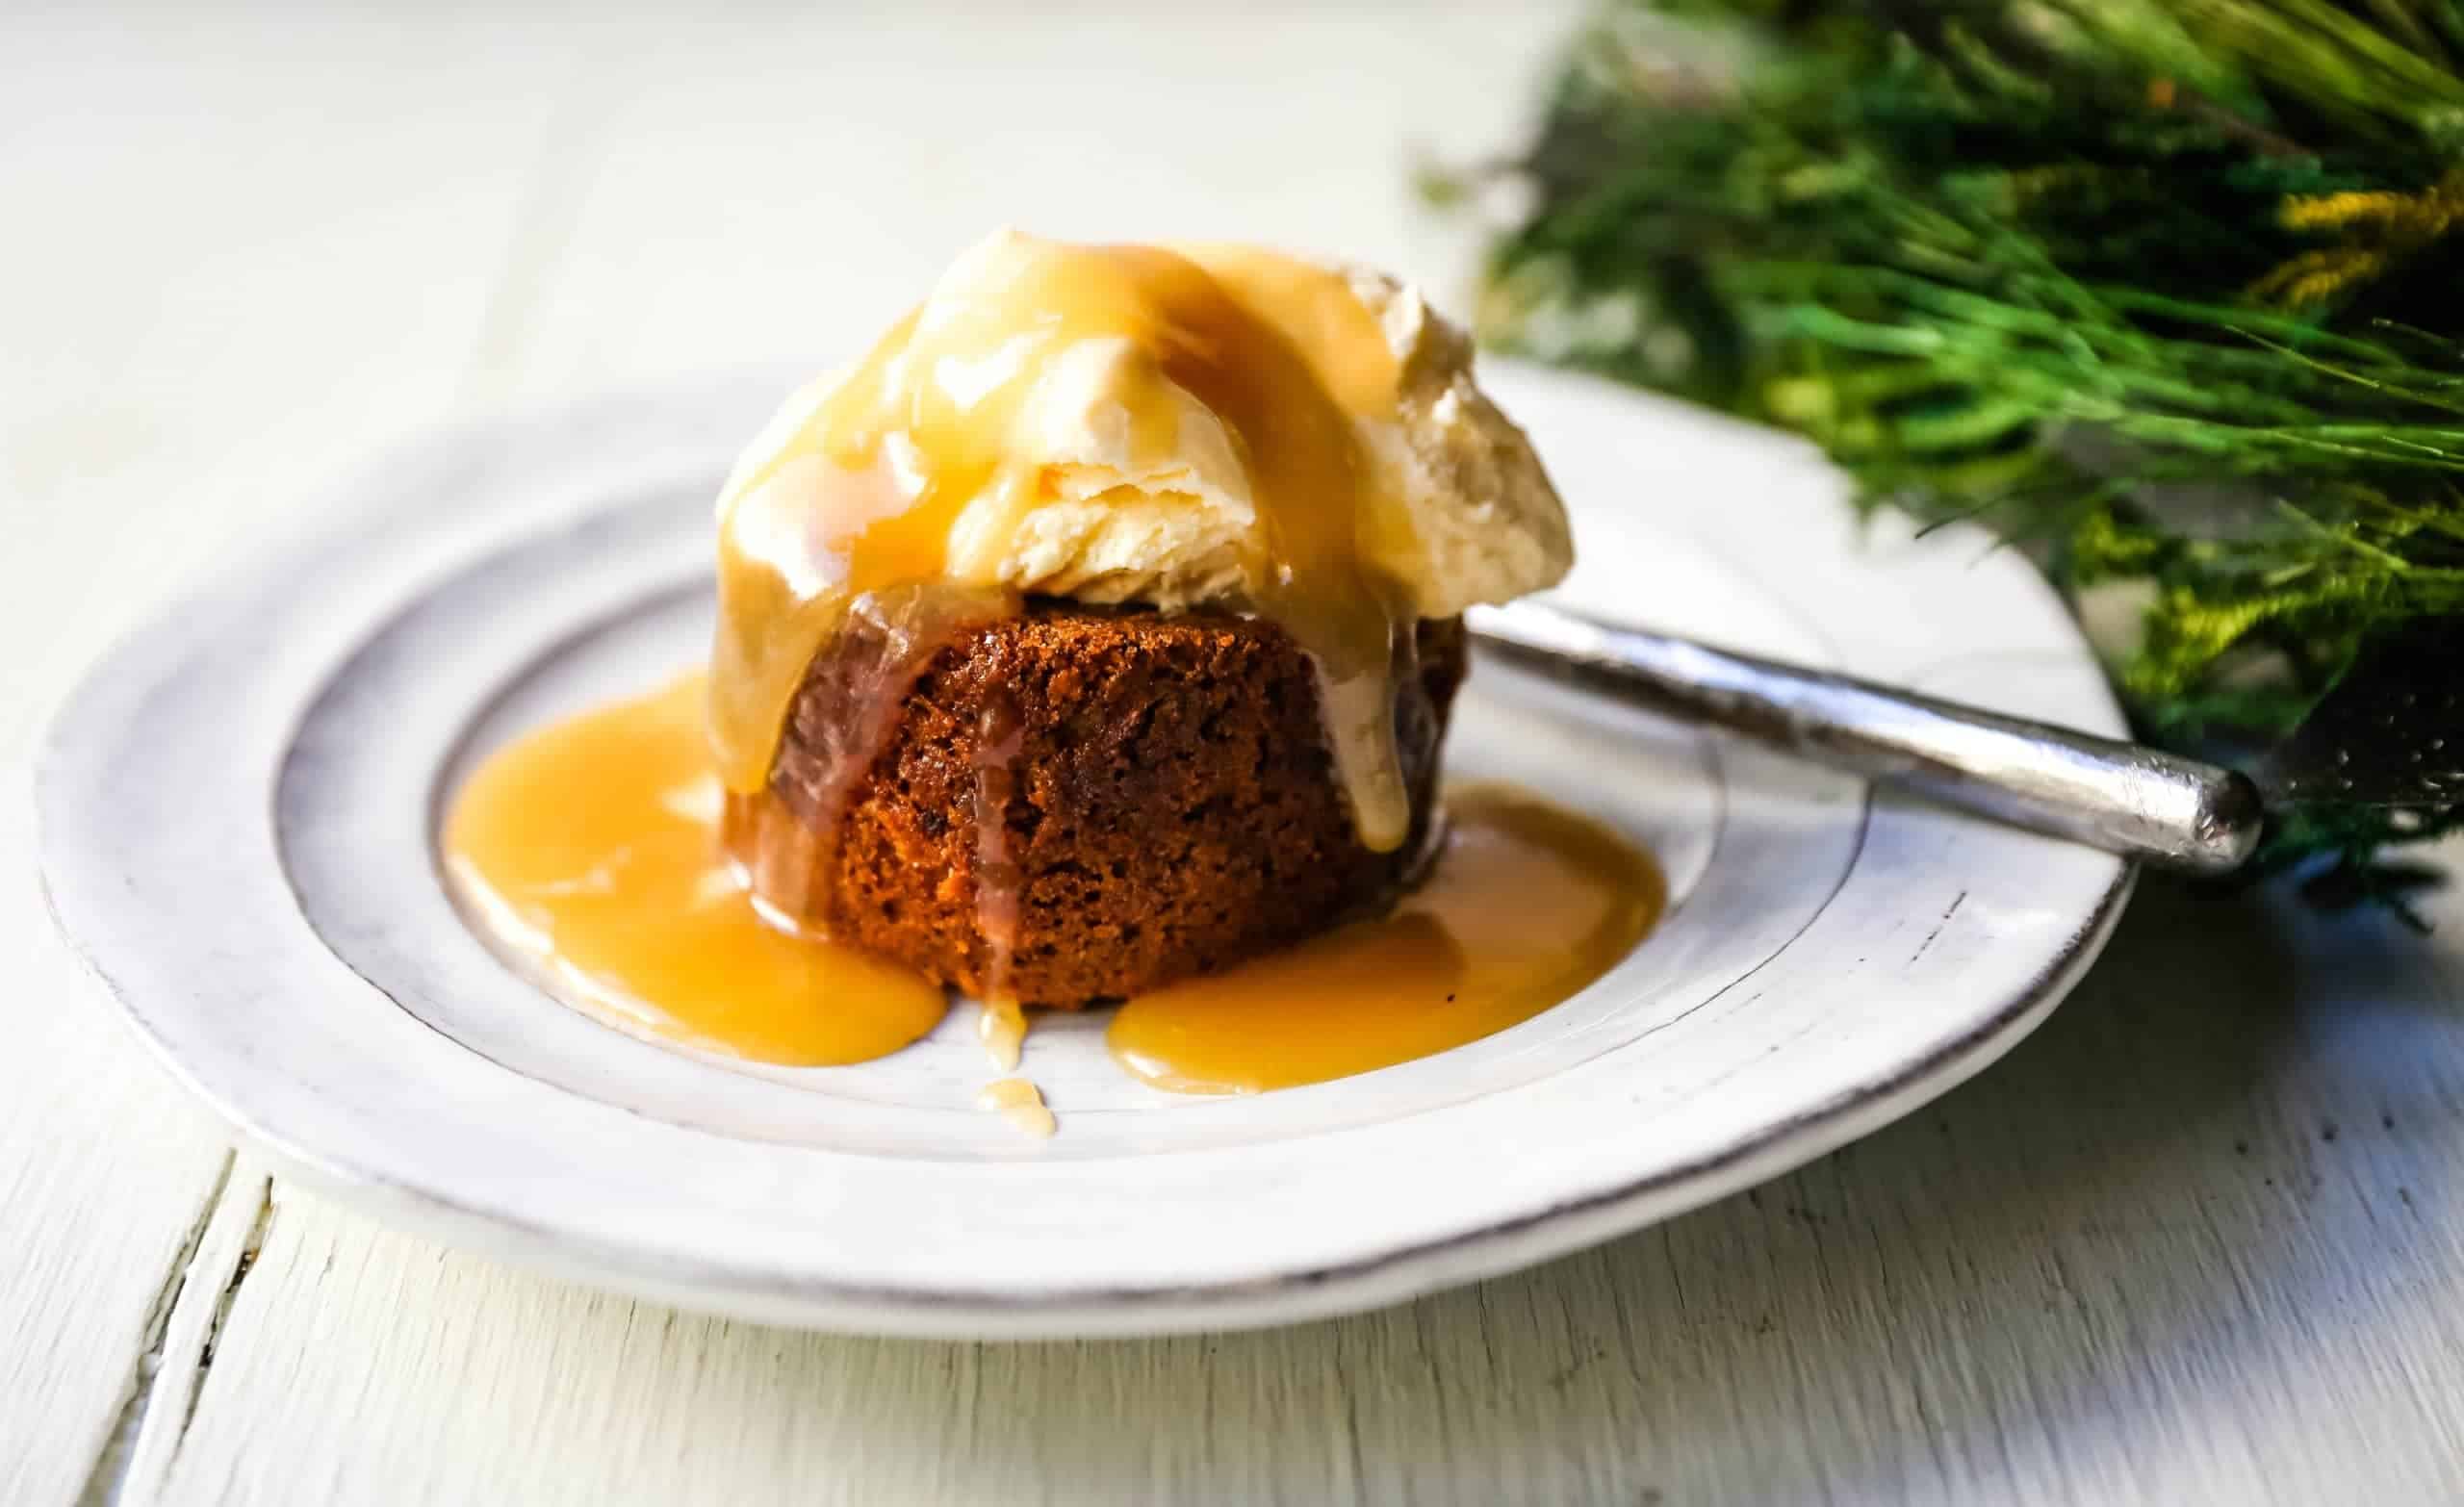 A festive Christmas dessert consisting of a delectable cake adorned with a generous scoop of creamy ice cream and drizzled with decadent caramel sauce.